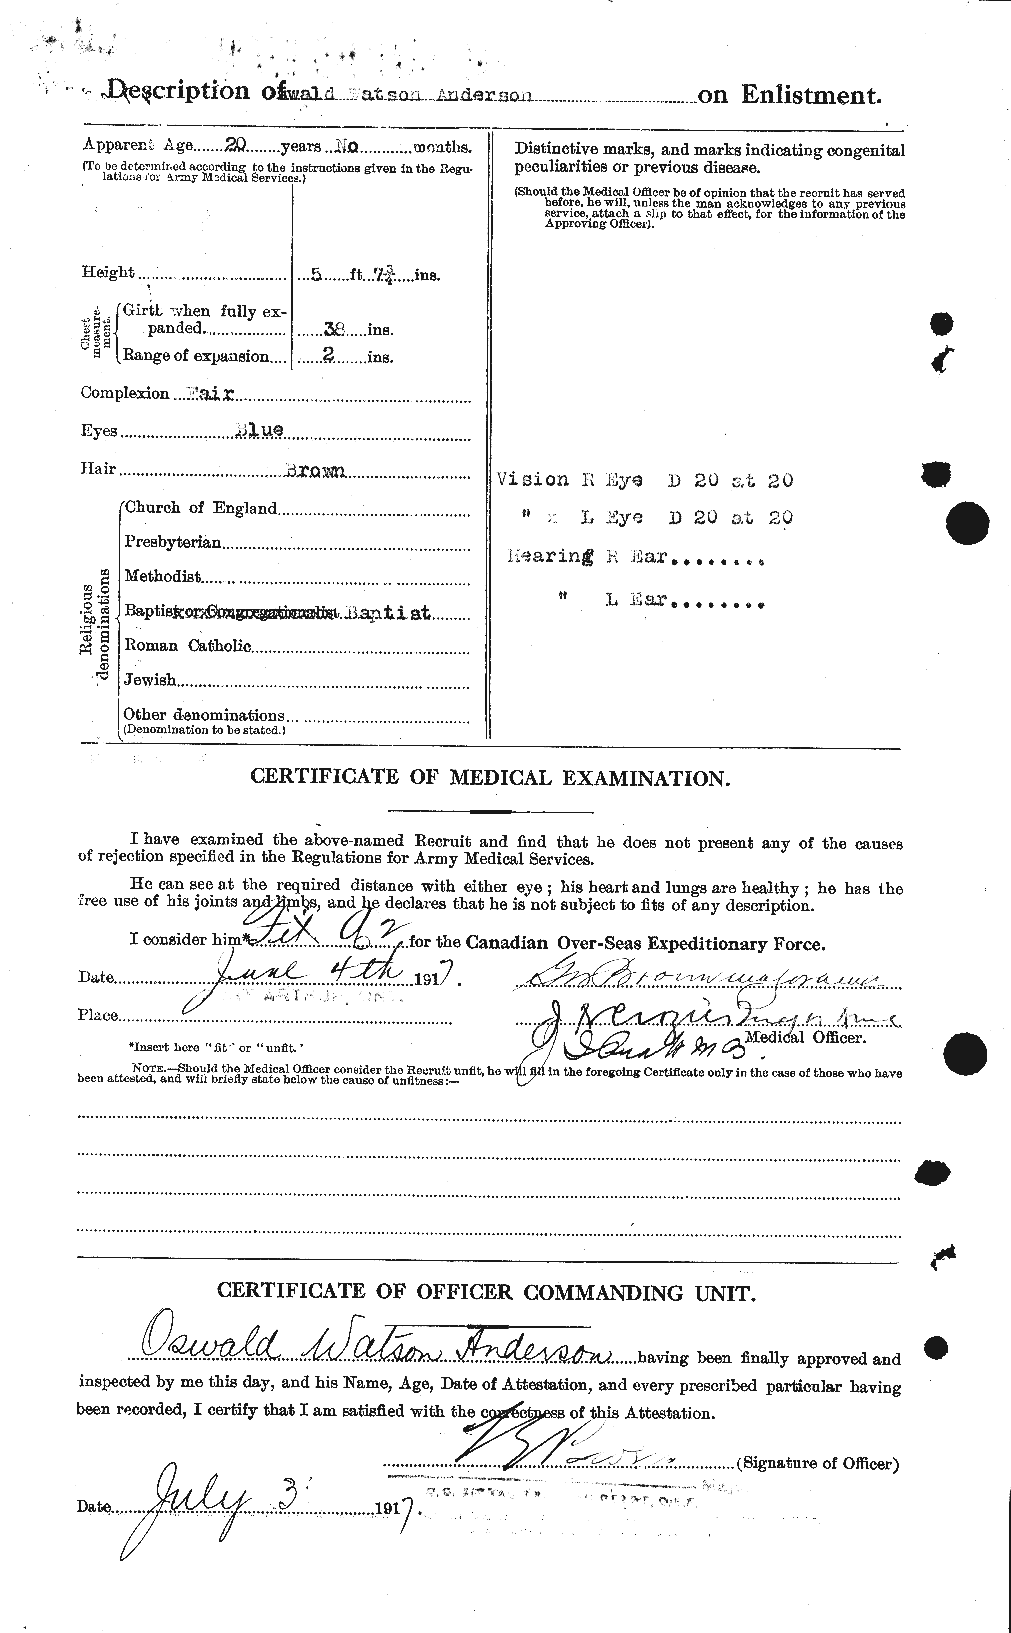 Personnel Records of the First World War - CEF 207374b